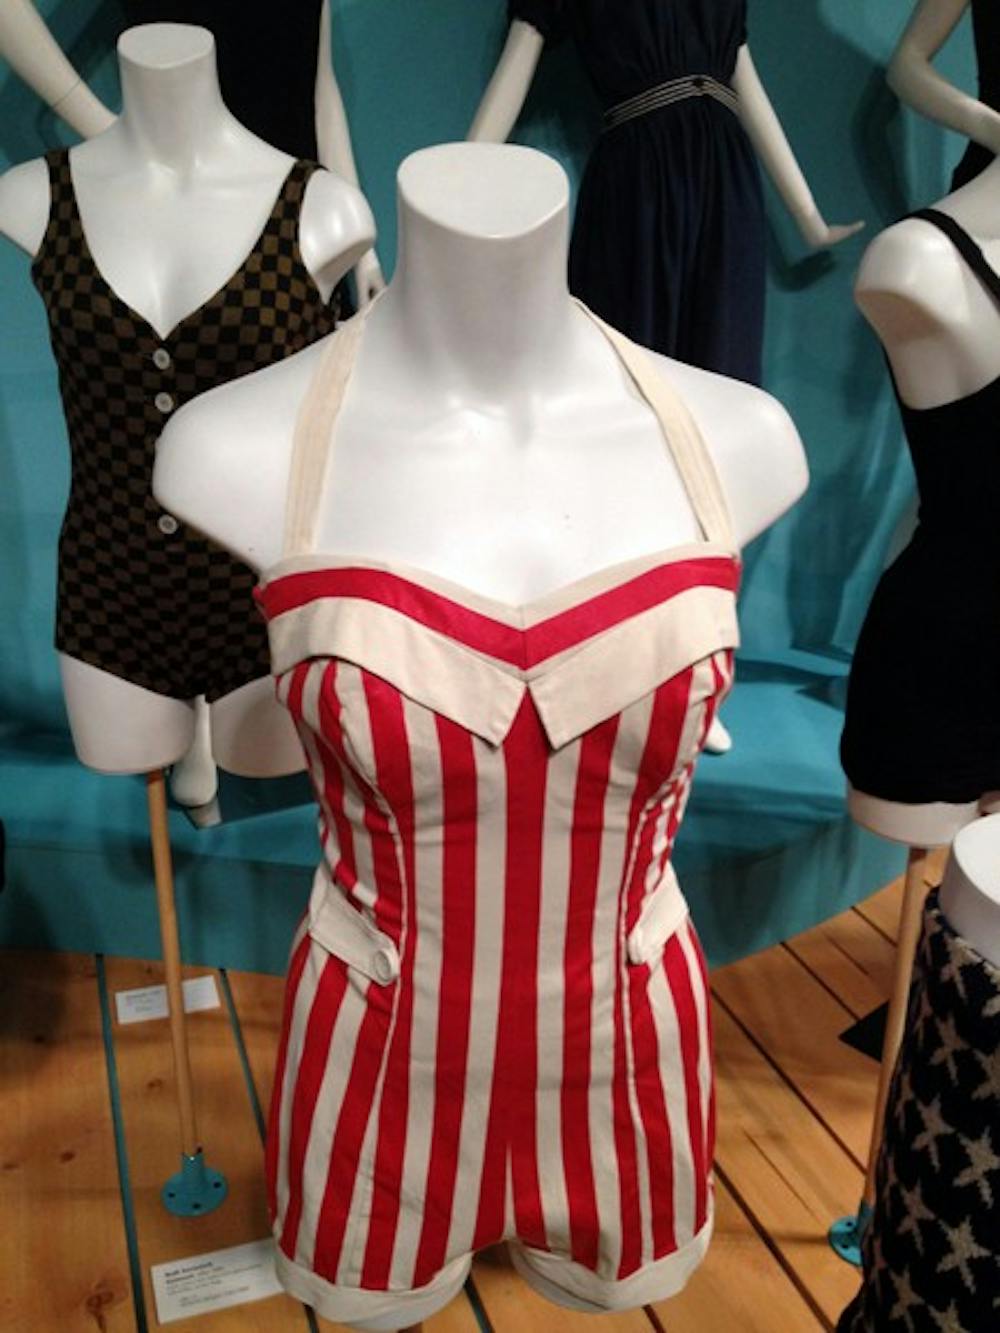 A swimsuit from the mid-1900s shows the evolution of swimsuits in "The Sea" exhibit. (Photo by William Hamilton)